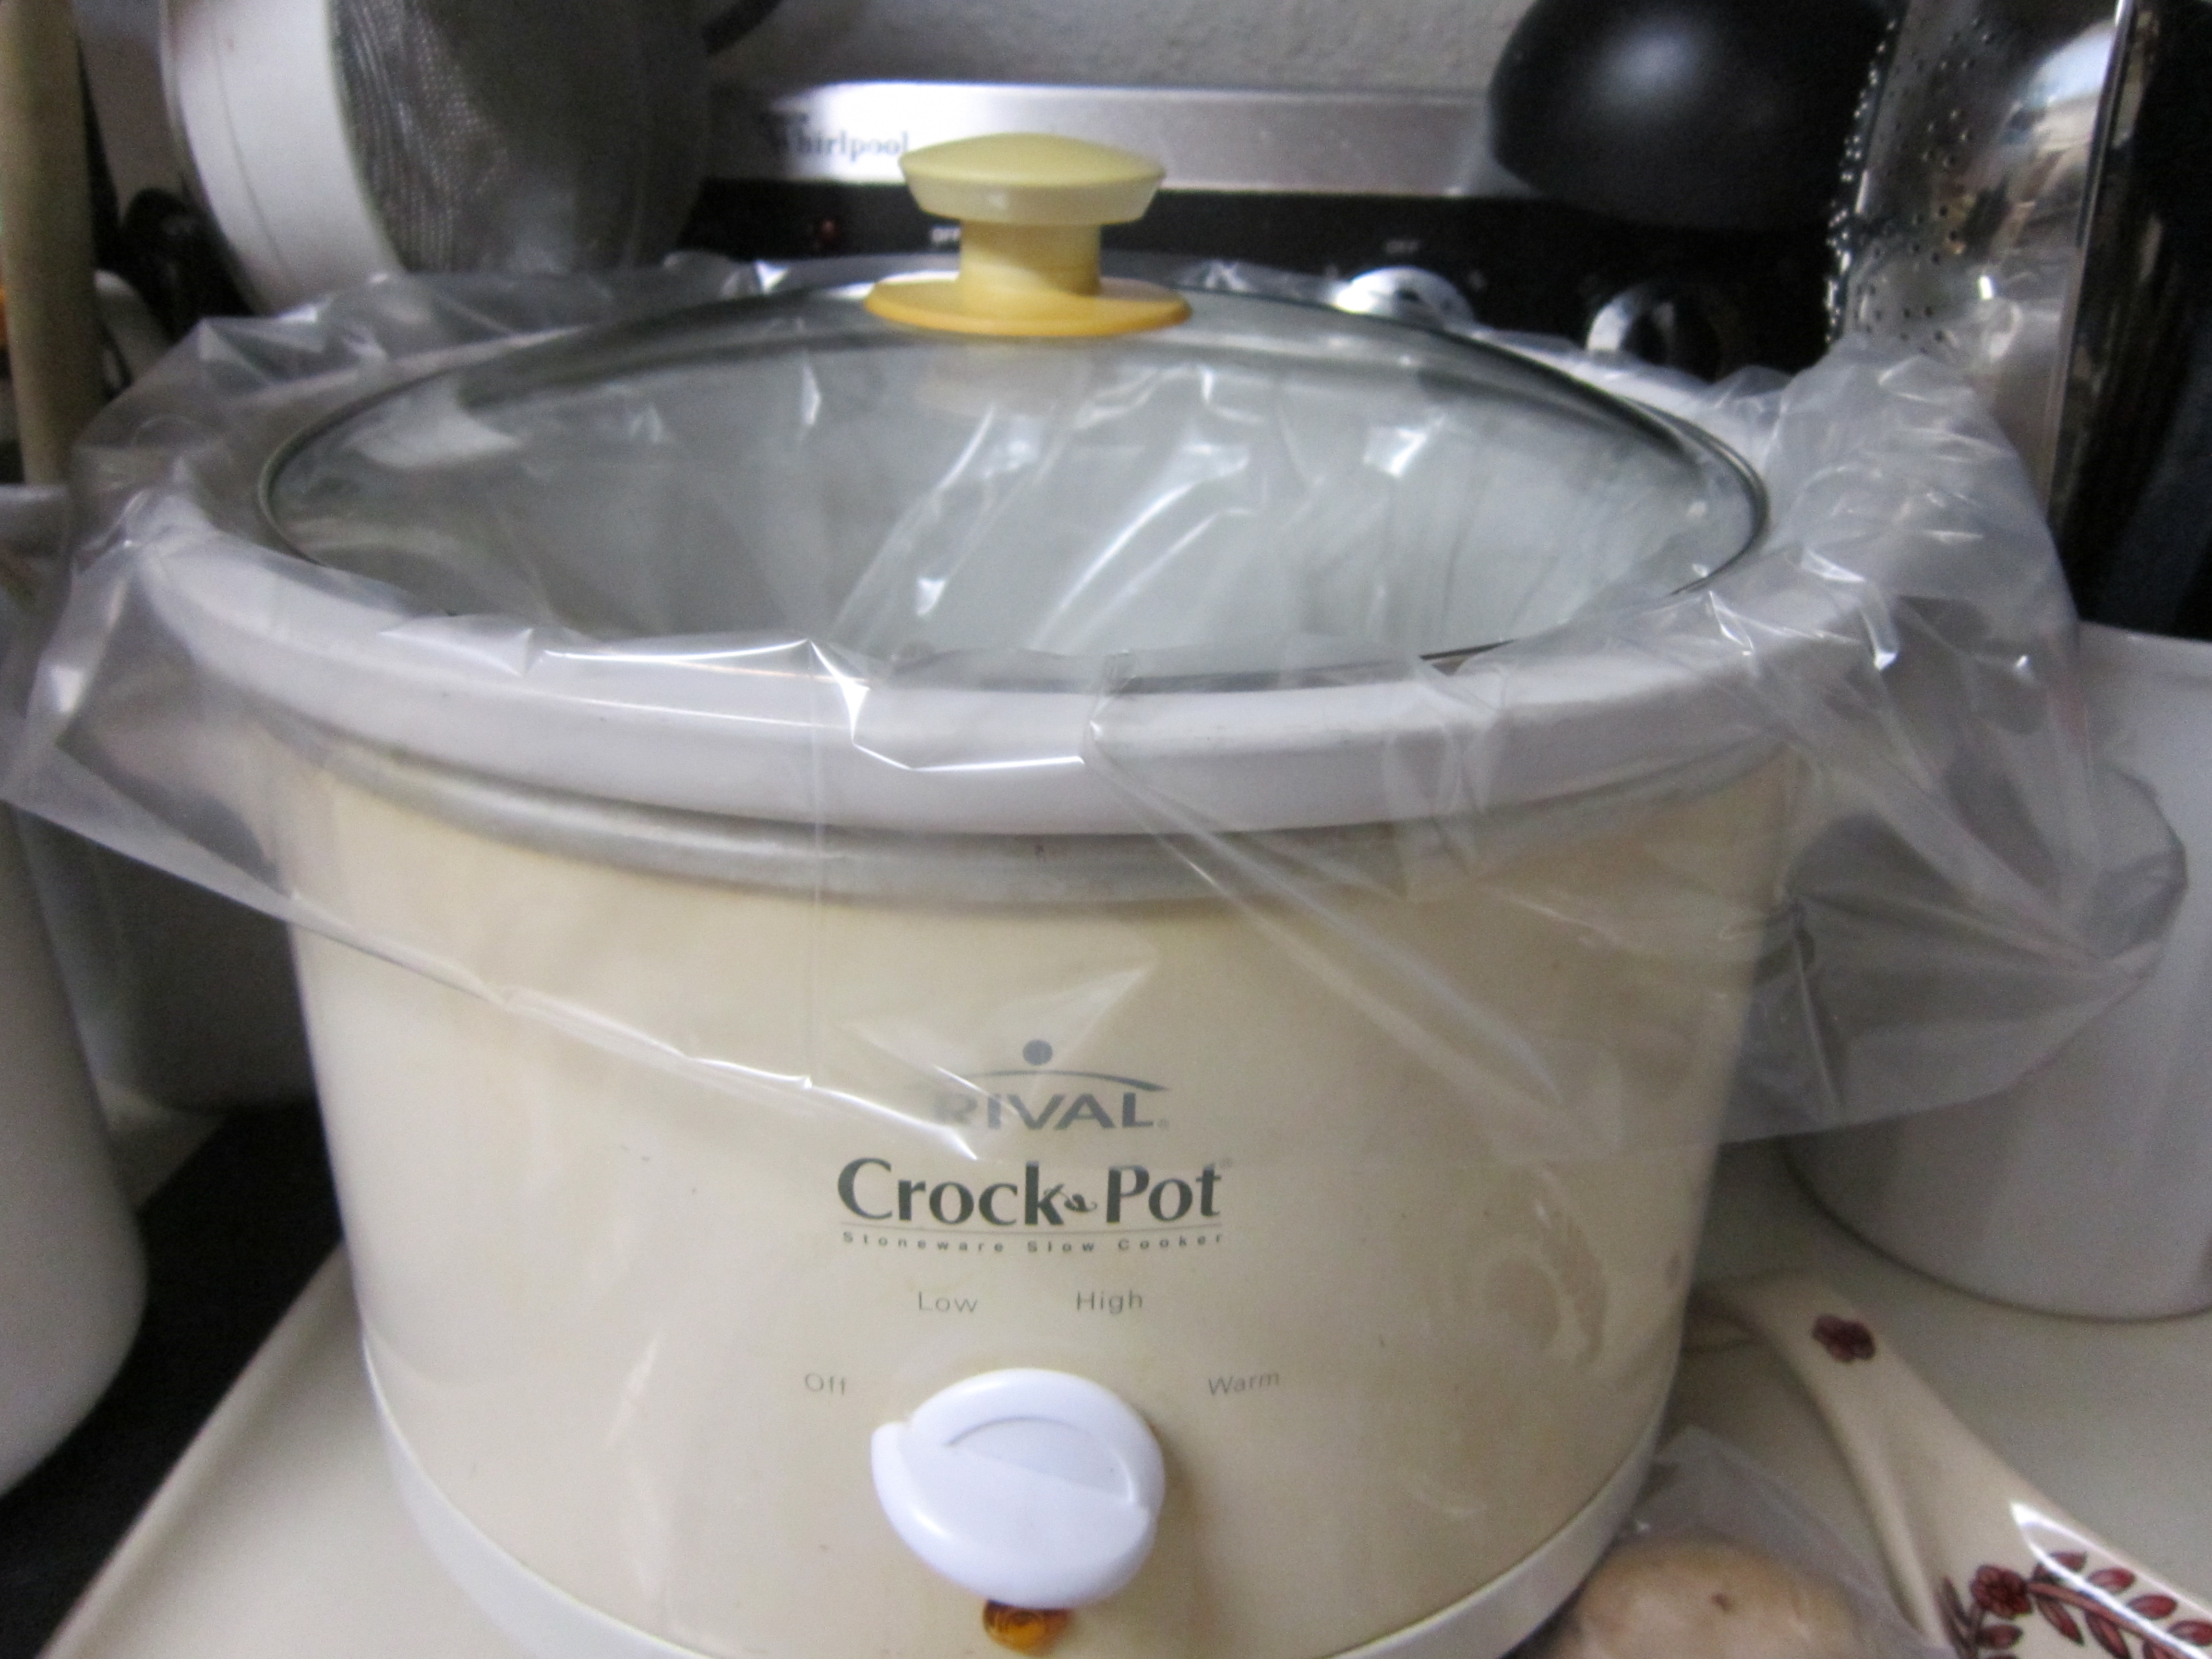 A Look at the Rival Crock Pot stoneware slow cooker 